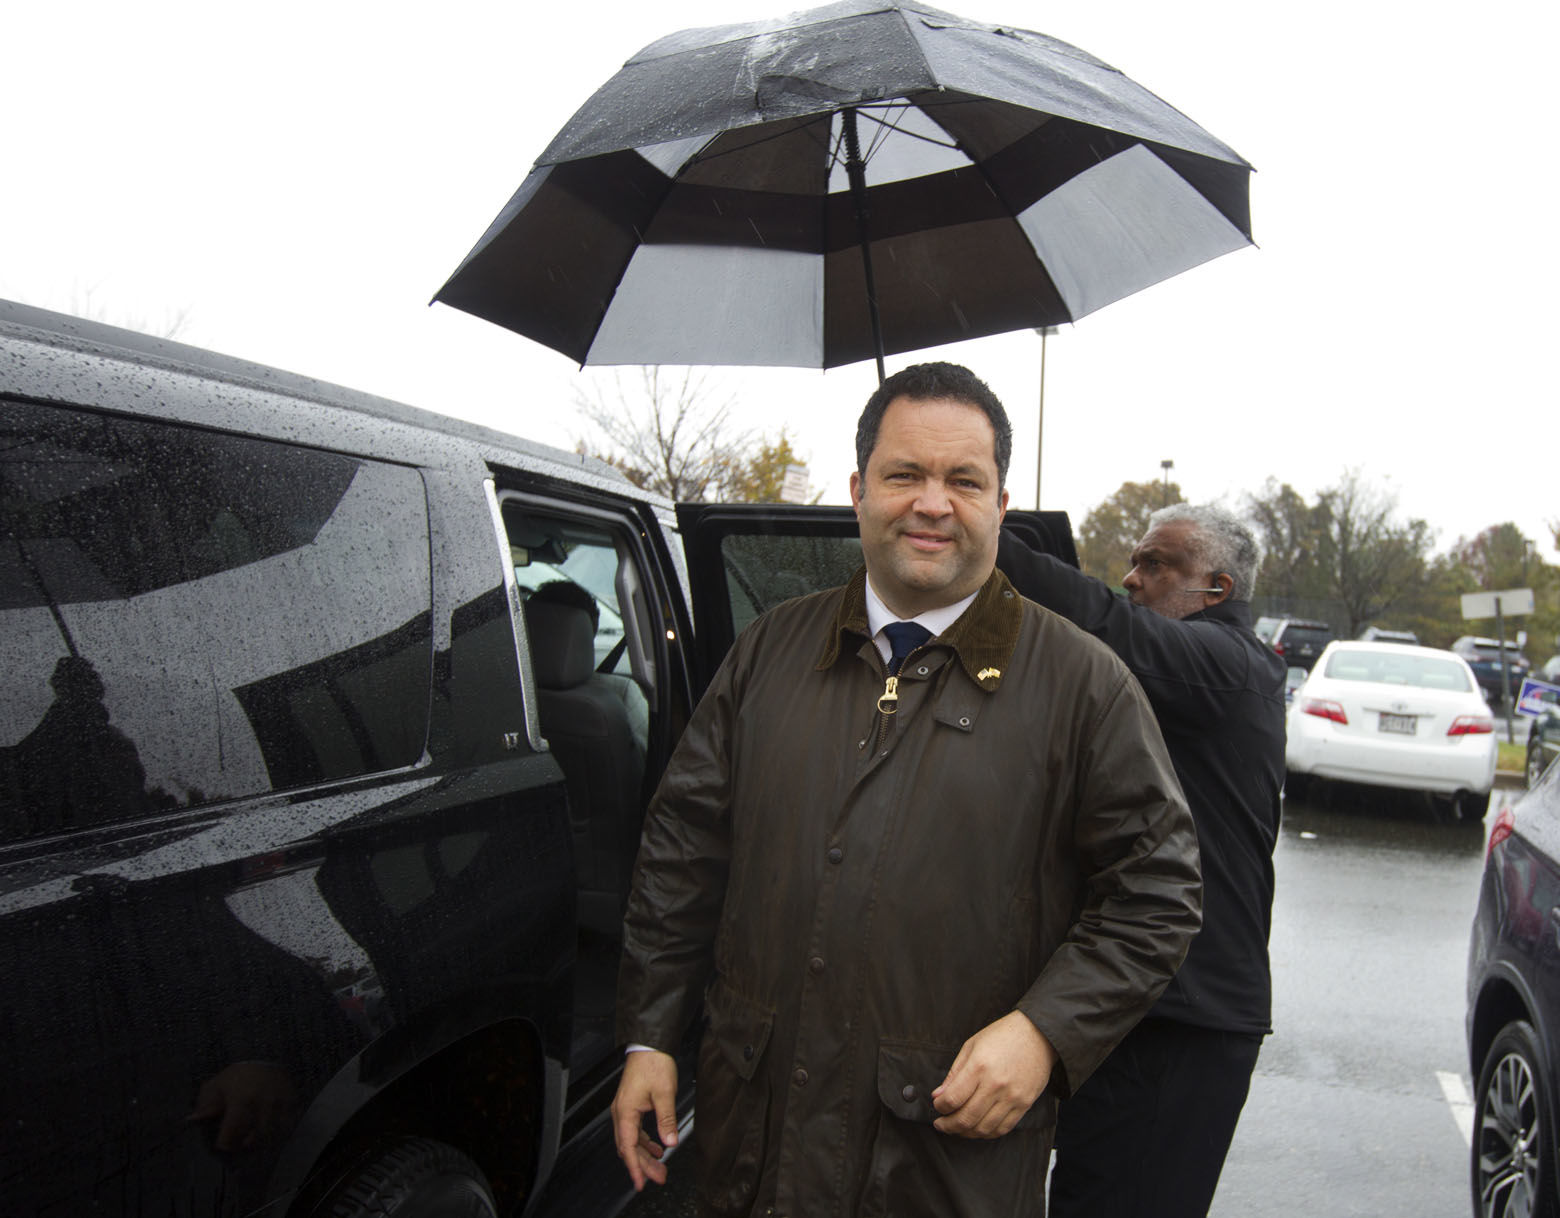 Maryland Democratic gubernatorial candidate Ben Jealous get in his car as he leaves after he stops by at John F. Kennedy High School polling place during the U.S. midterm election, Tuesday, Nov. 6, 2018, in Silver Spring, Md. (AP Photo/Jose Luis Magana)